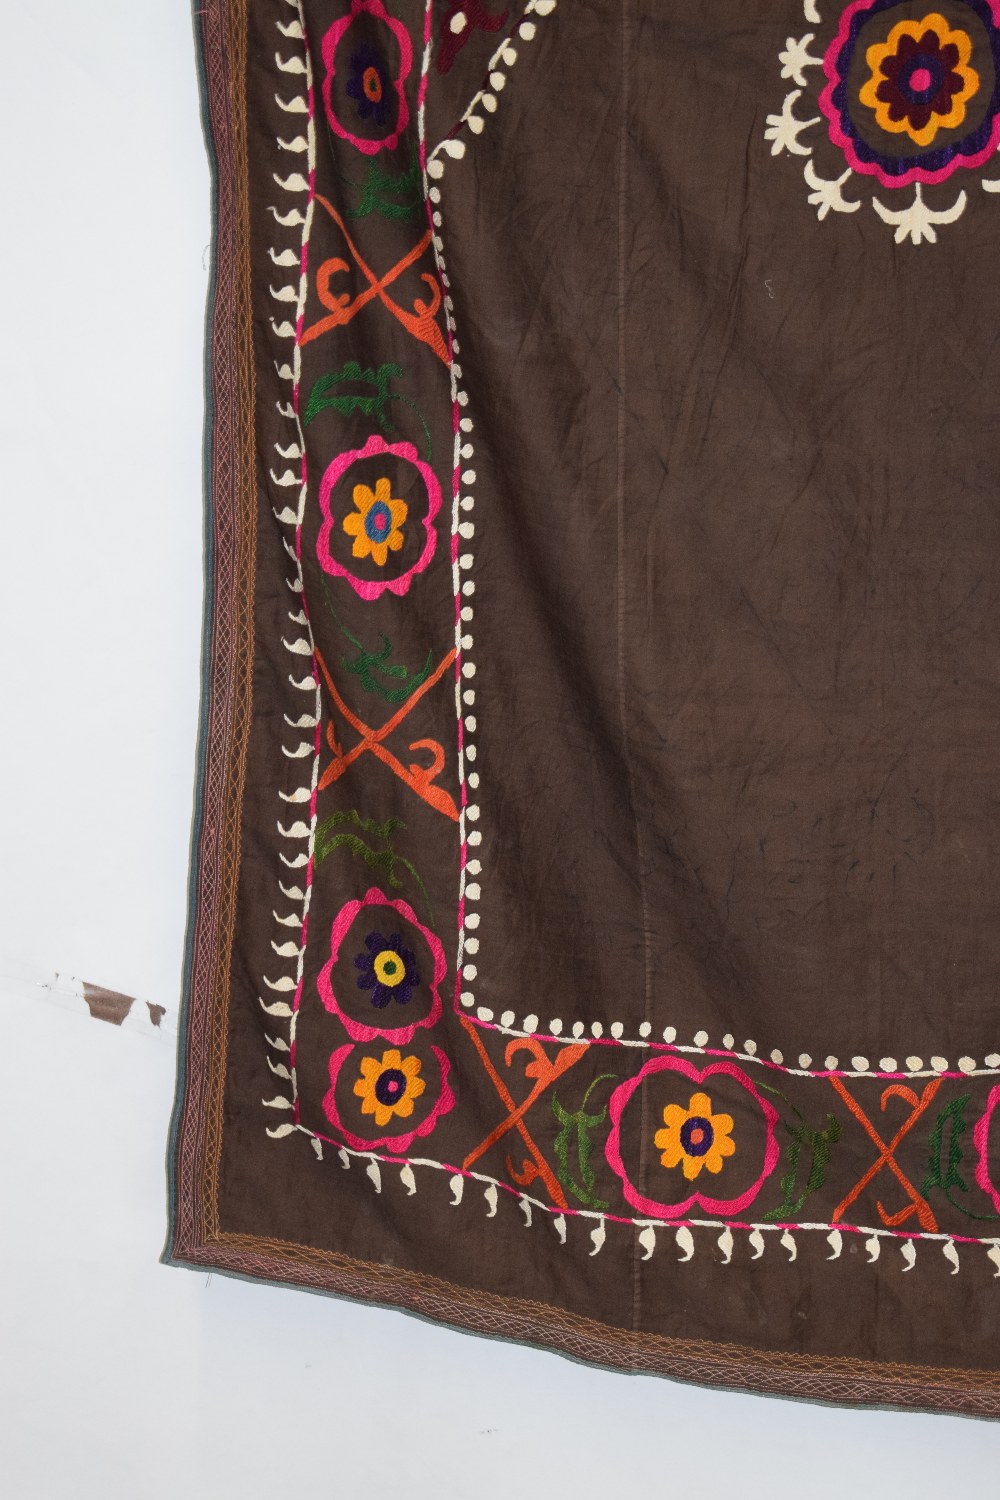 Uzbek suzani joinamoz (prayer cloth), Afghanistan, circa 1960s, 6ft. 3in. X 3ft. 5in. 1.91m. x 1. - Image 5 of 12